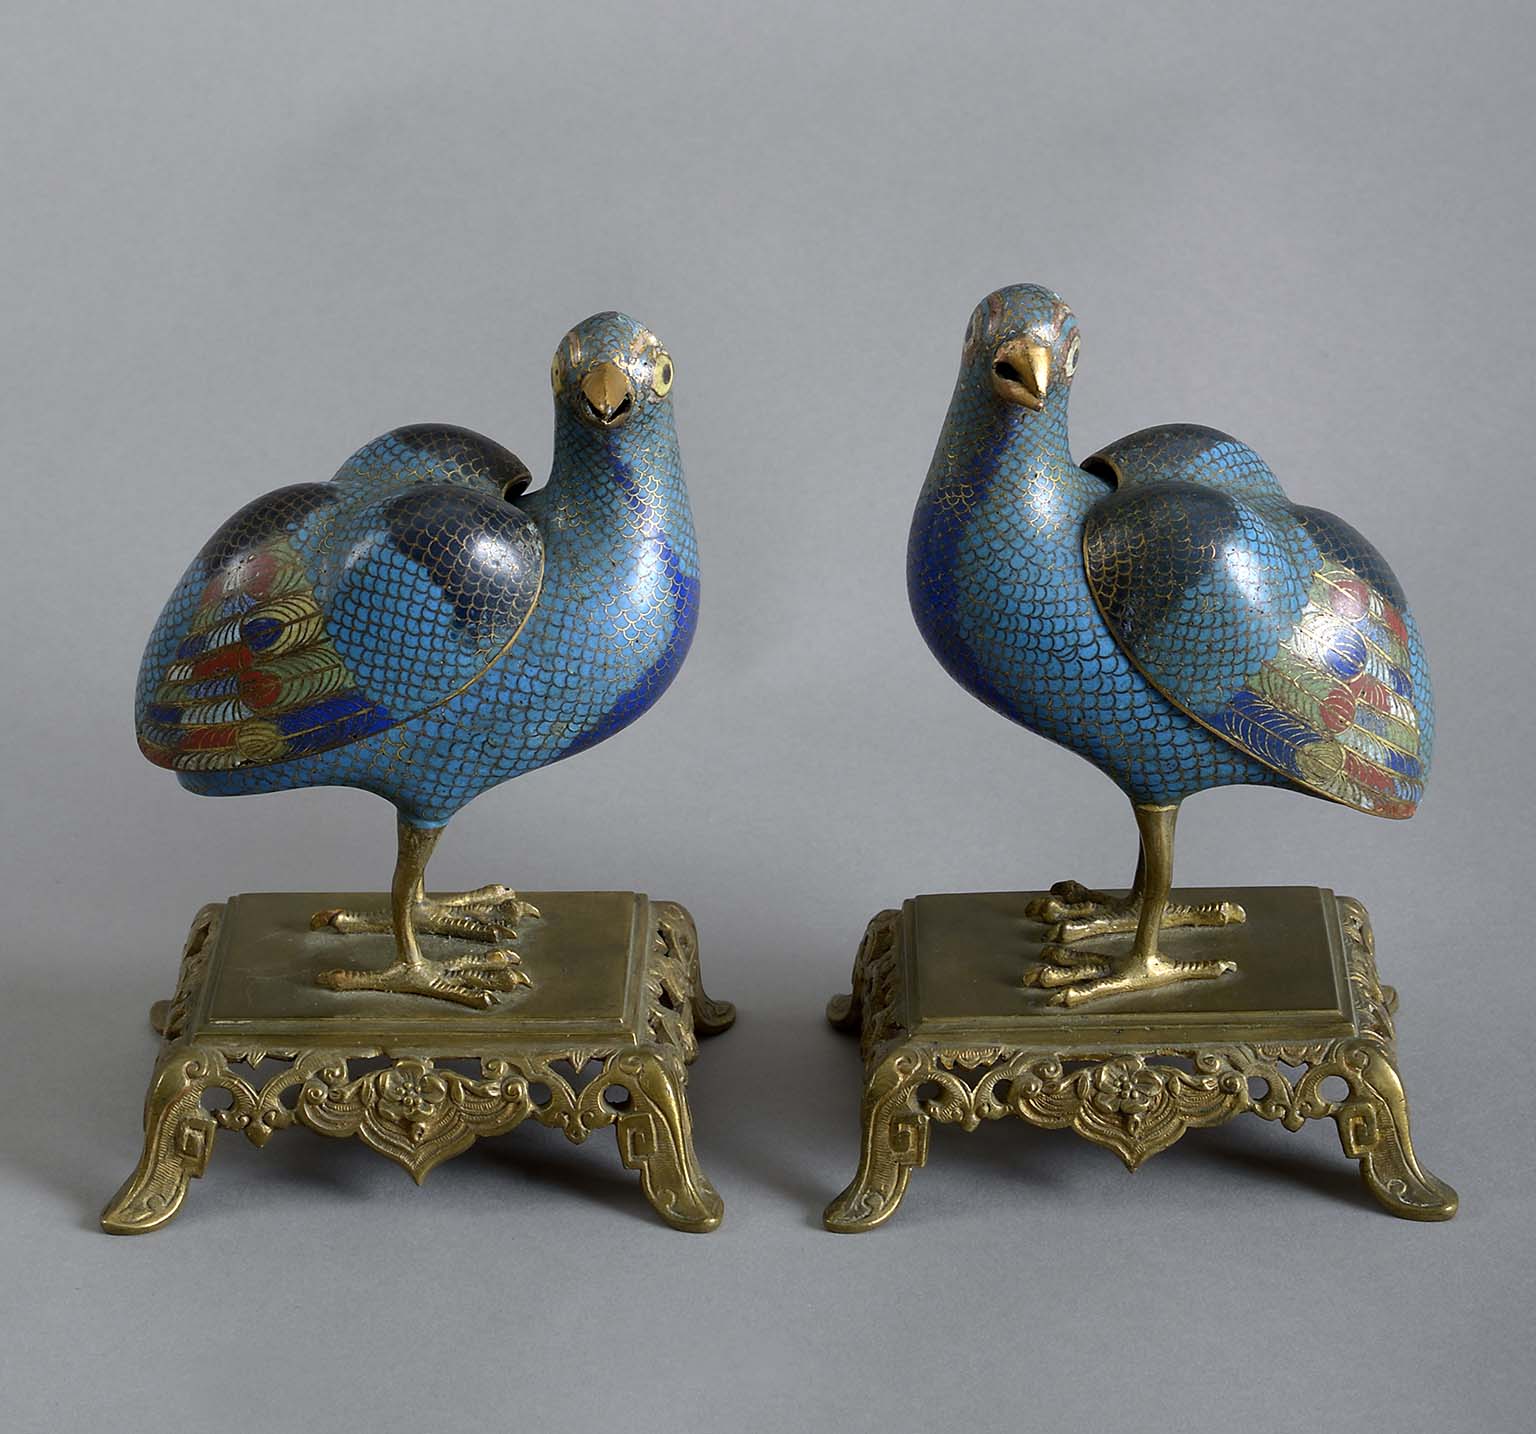 Pair of Chinese Cloisonne Quail Incense Burners